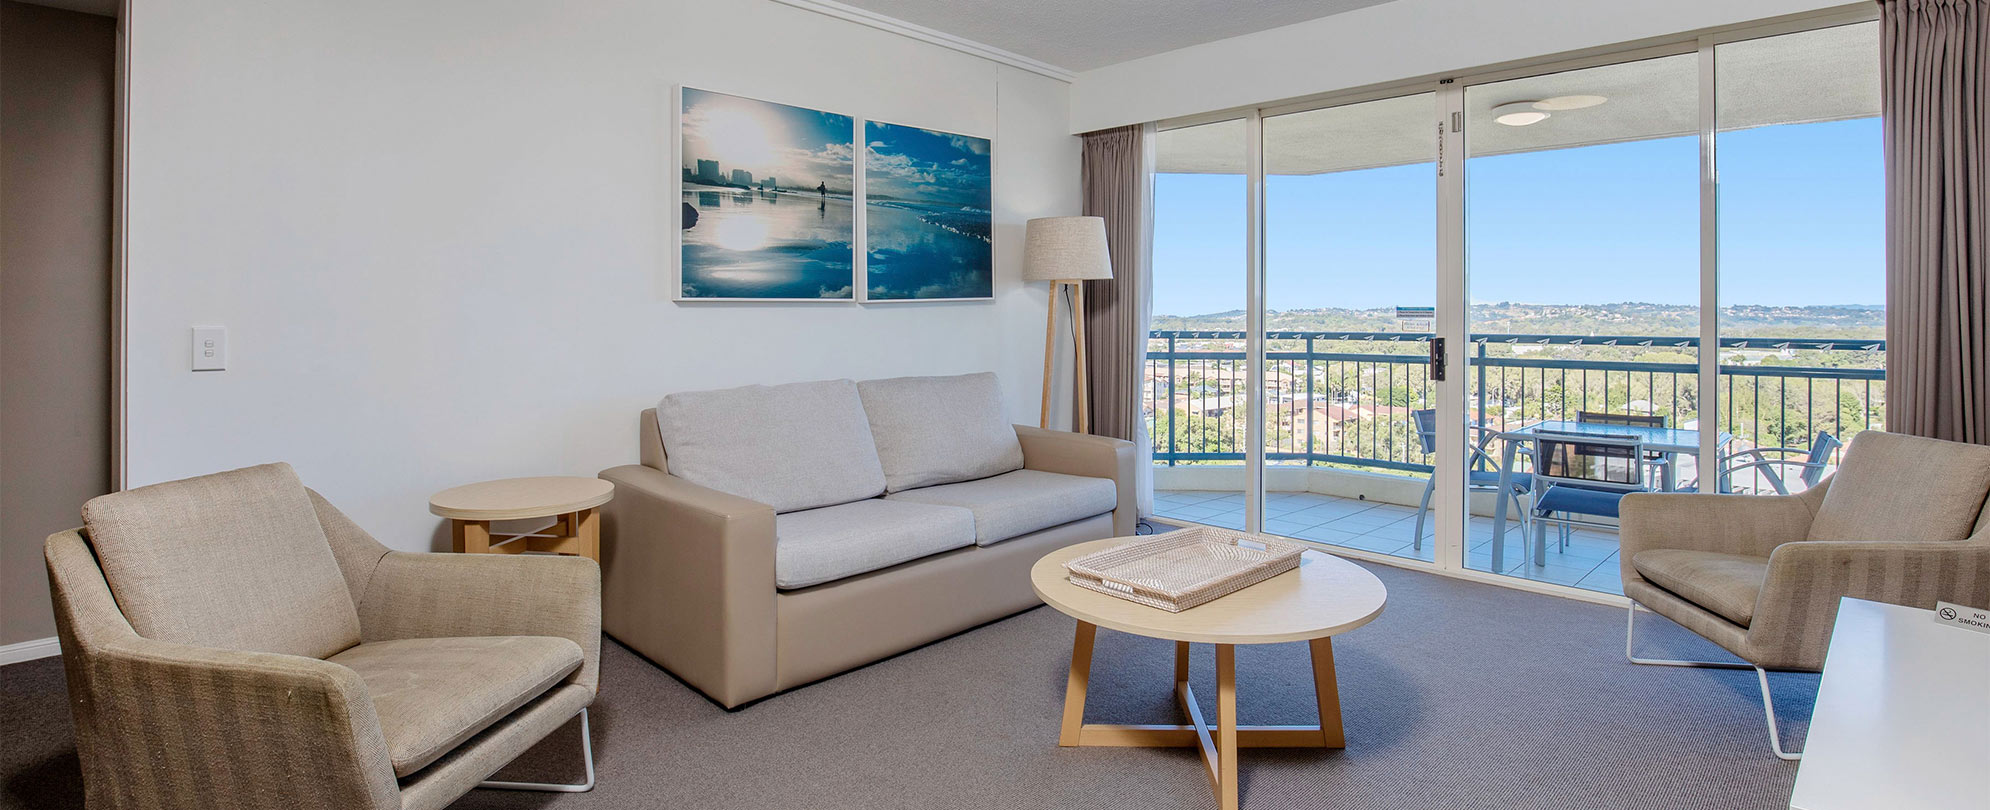 The living area of a Club Wyndham Kirra Beach standard suite with a couch, chairs, and coffee table.